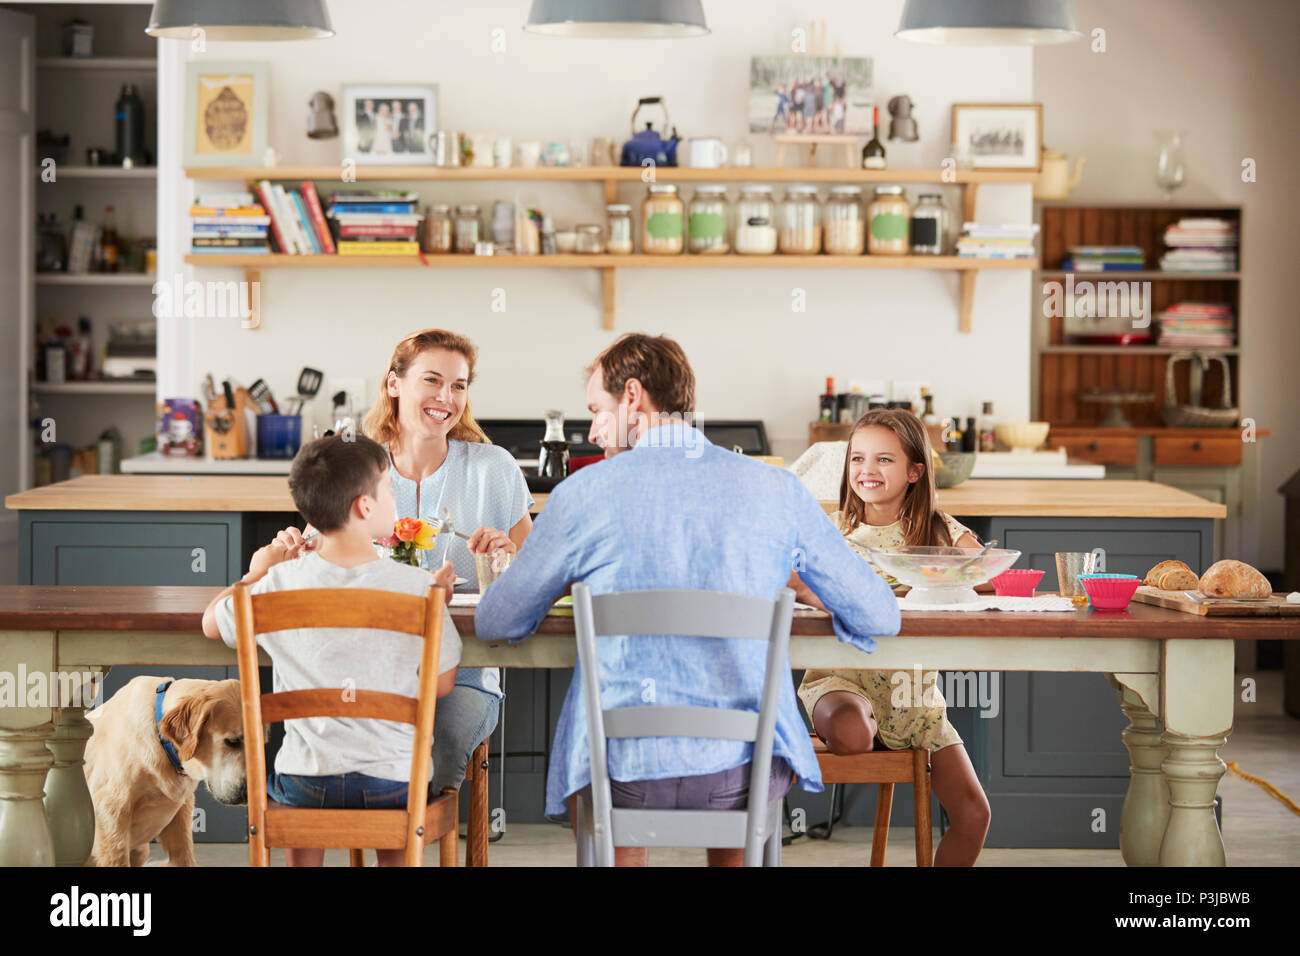 Family with dog eating together at the table in kitchen Stock Photo